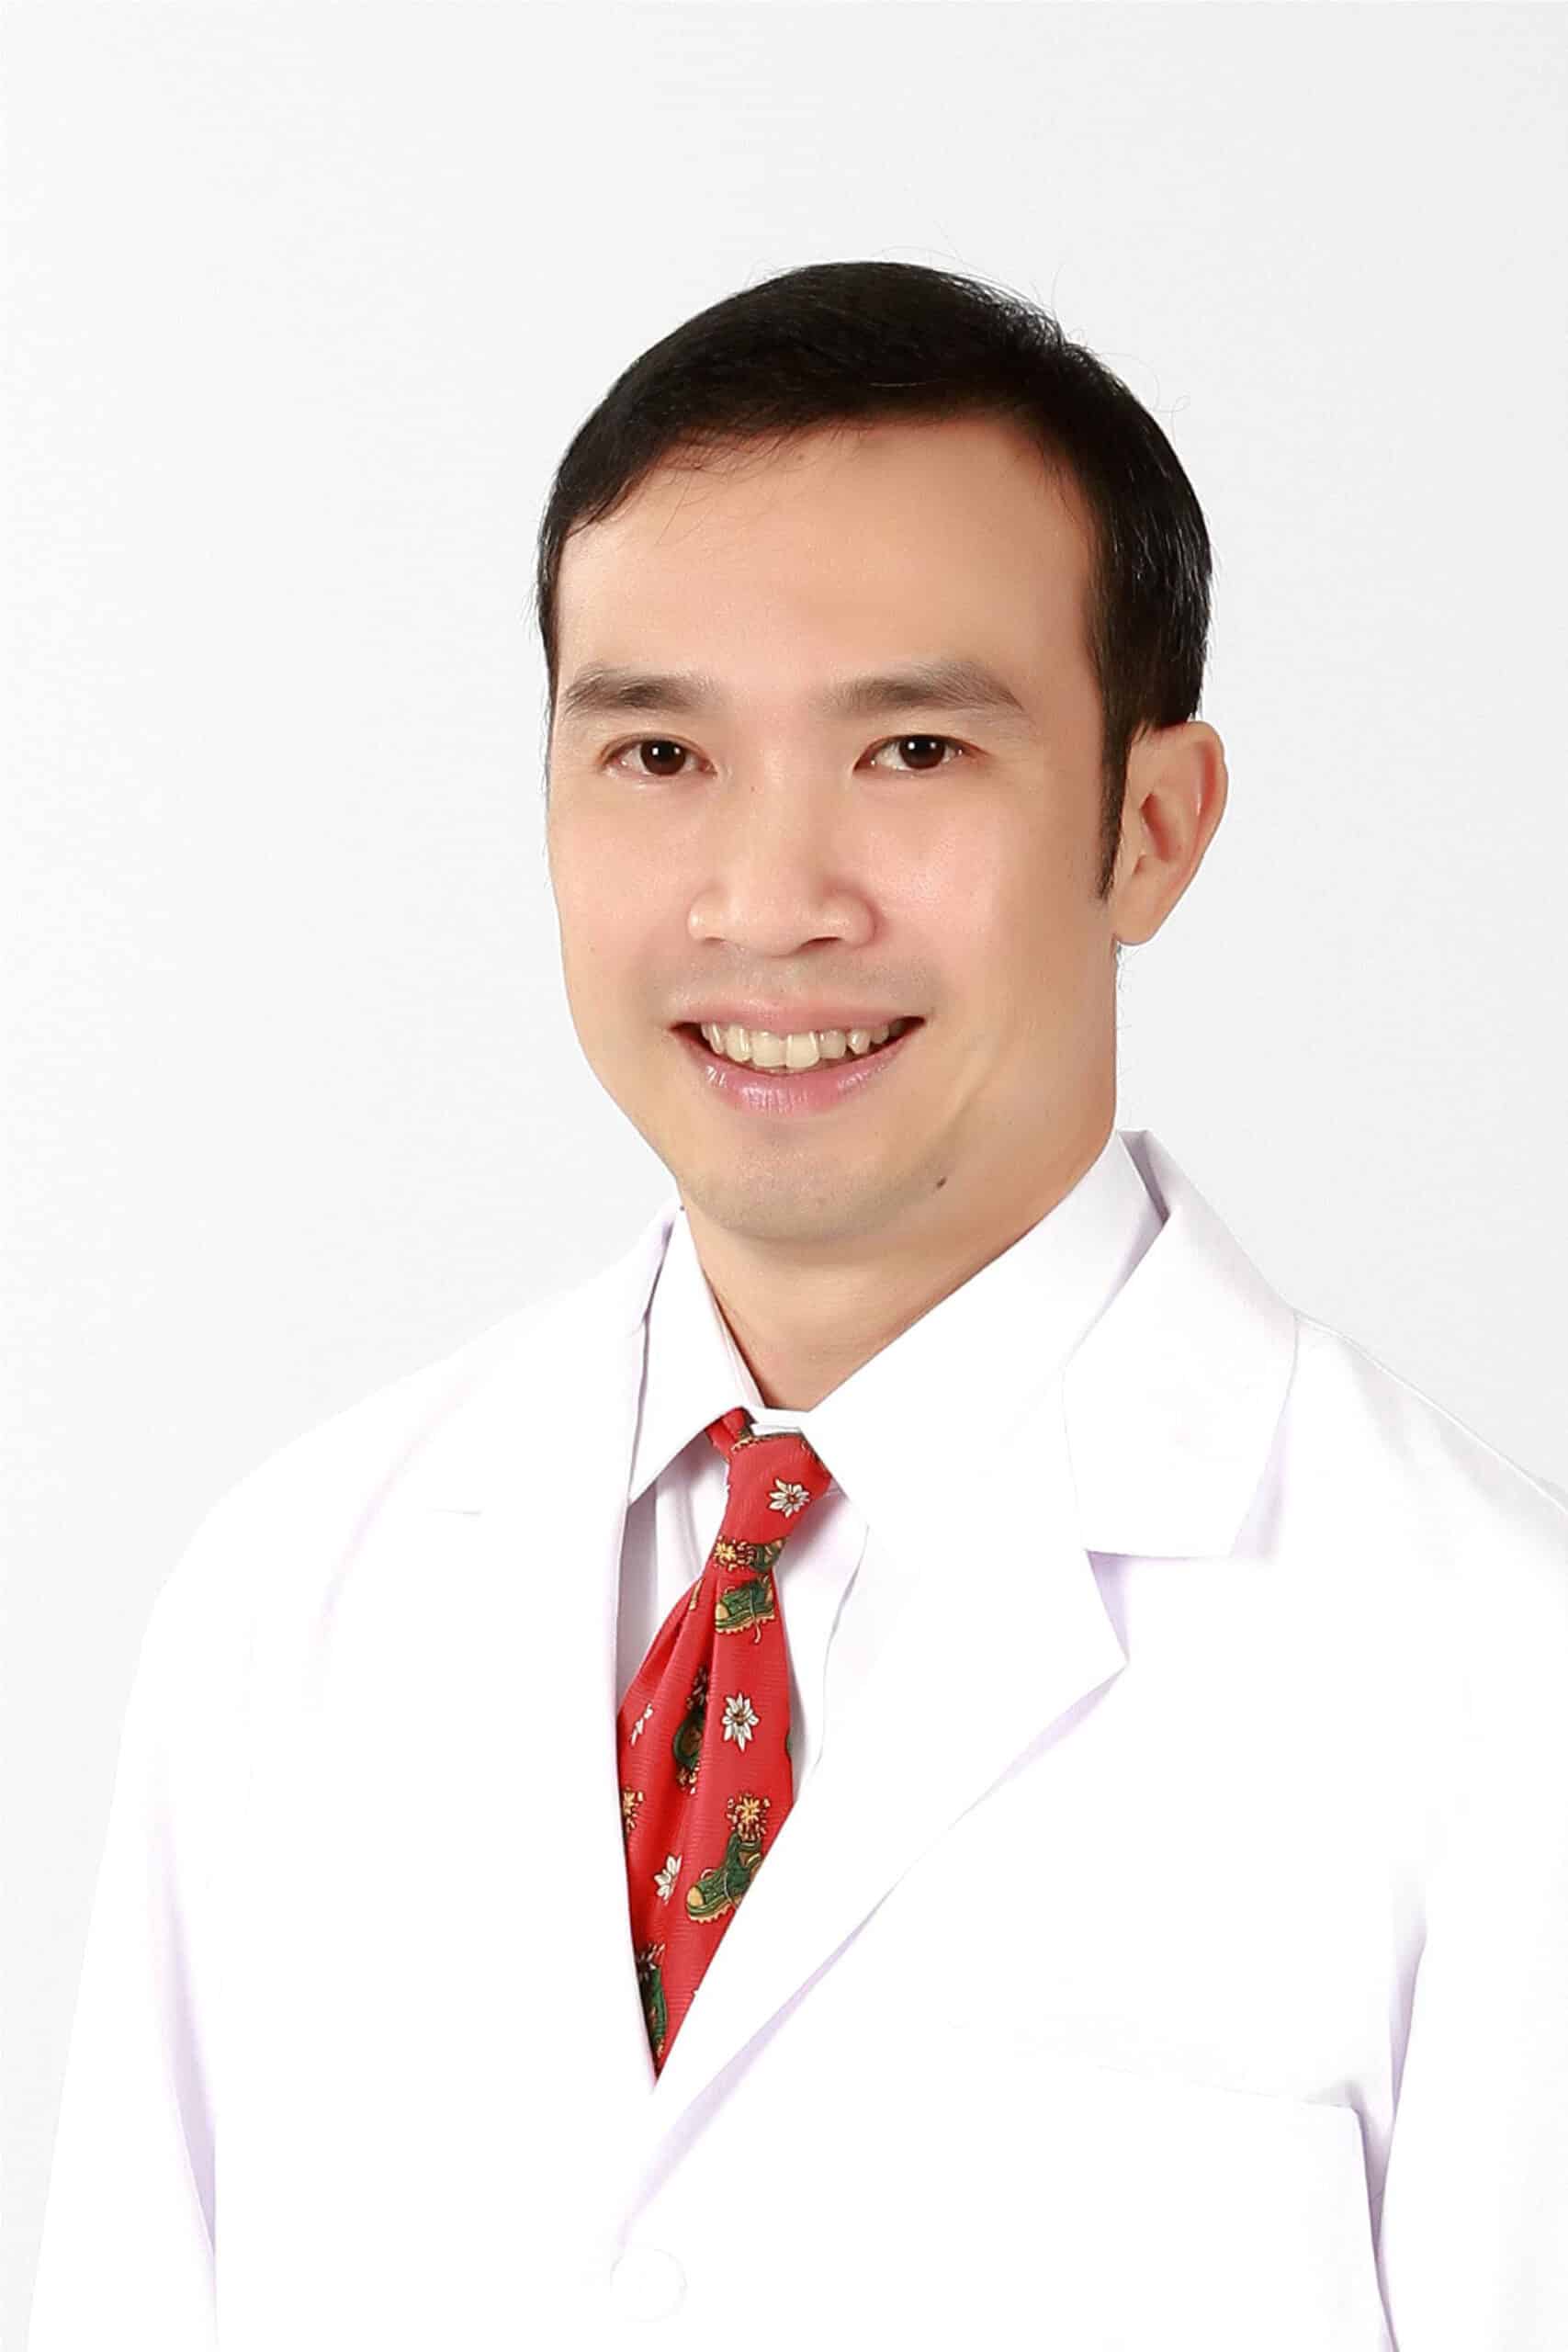 Professor Apichai Khongphatthanayothin, M.D., the Center of Excellence in Arrhythmia Research, Faculty of Medicine, Chulalongkorn University